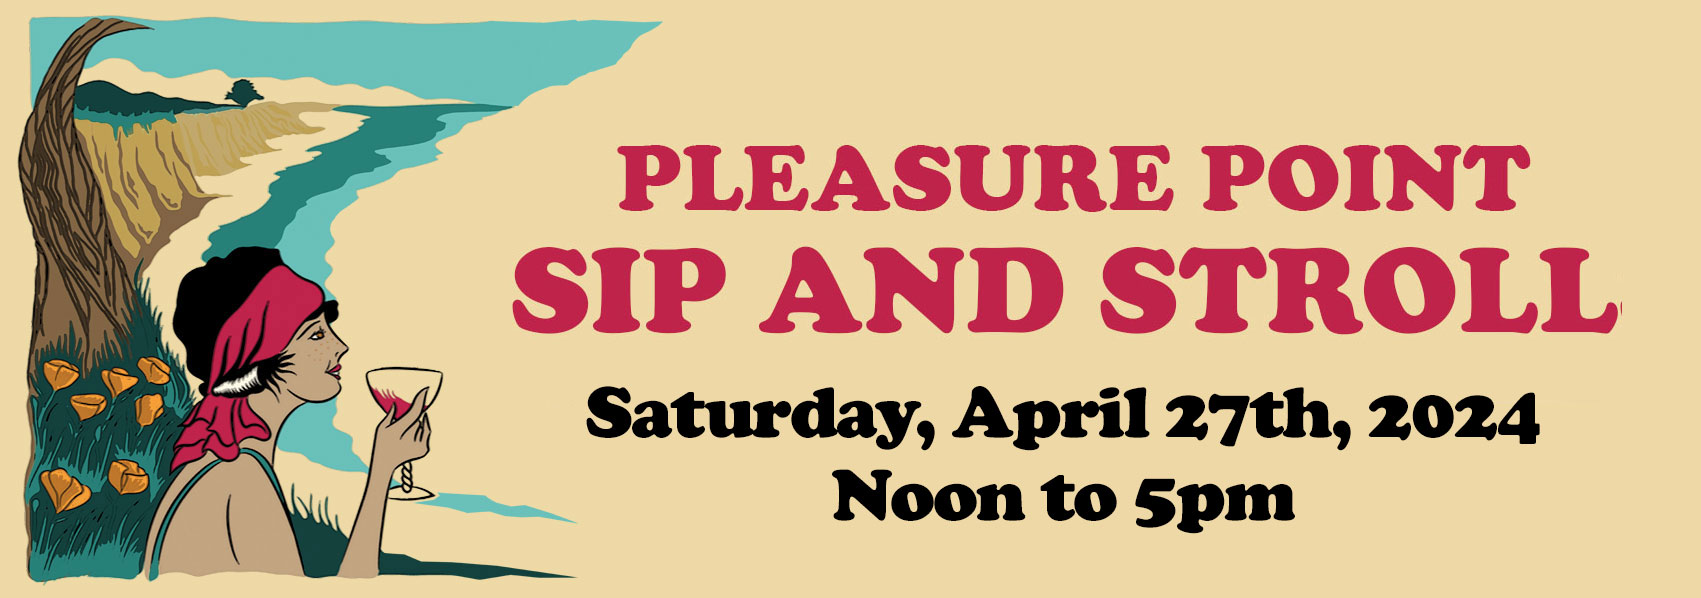 Pleasure Point Sip and Stroll Saturday, April 27th, 2024